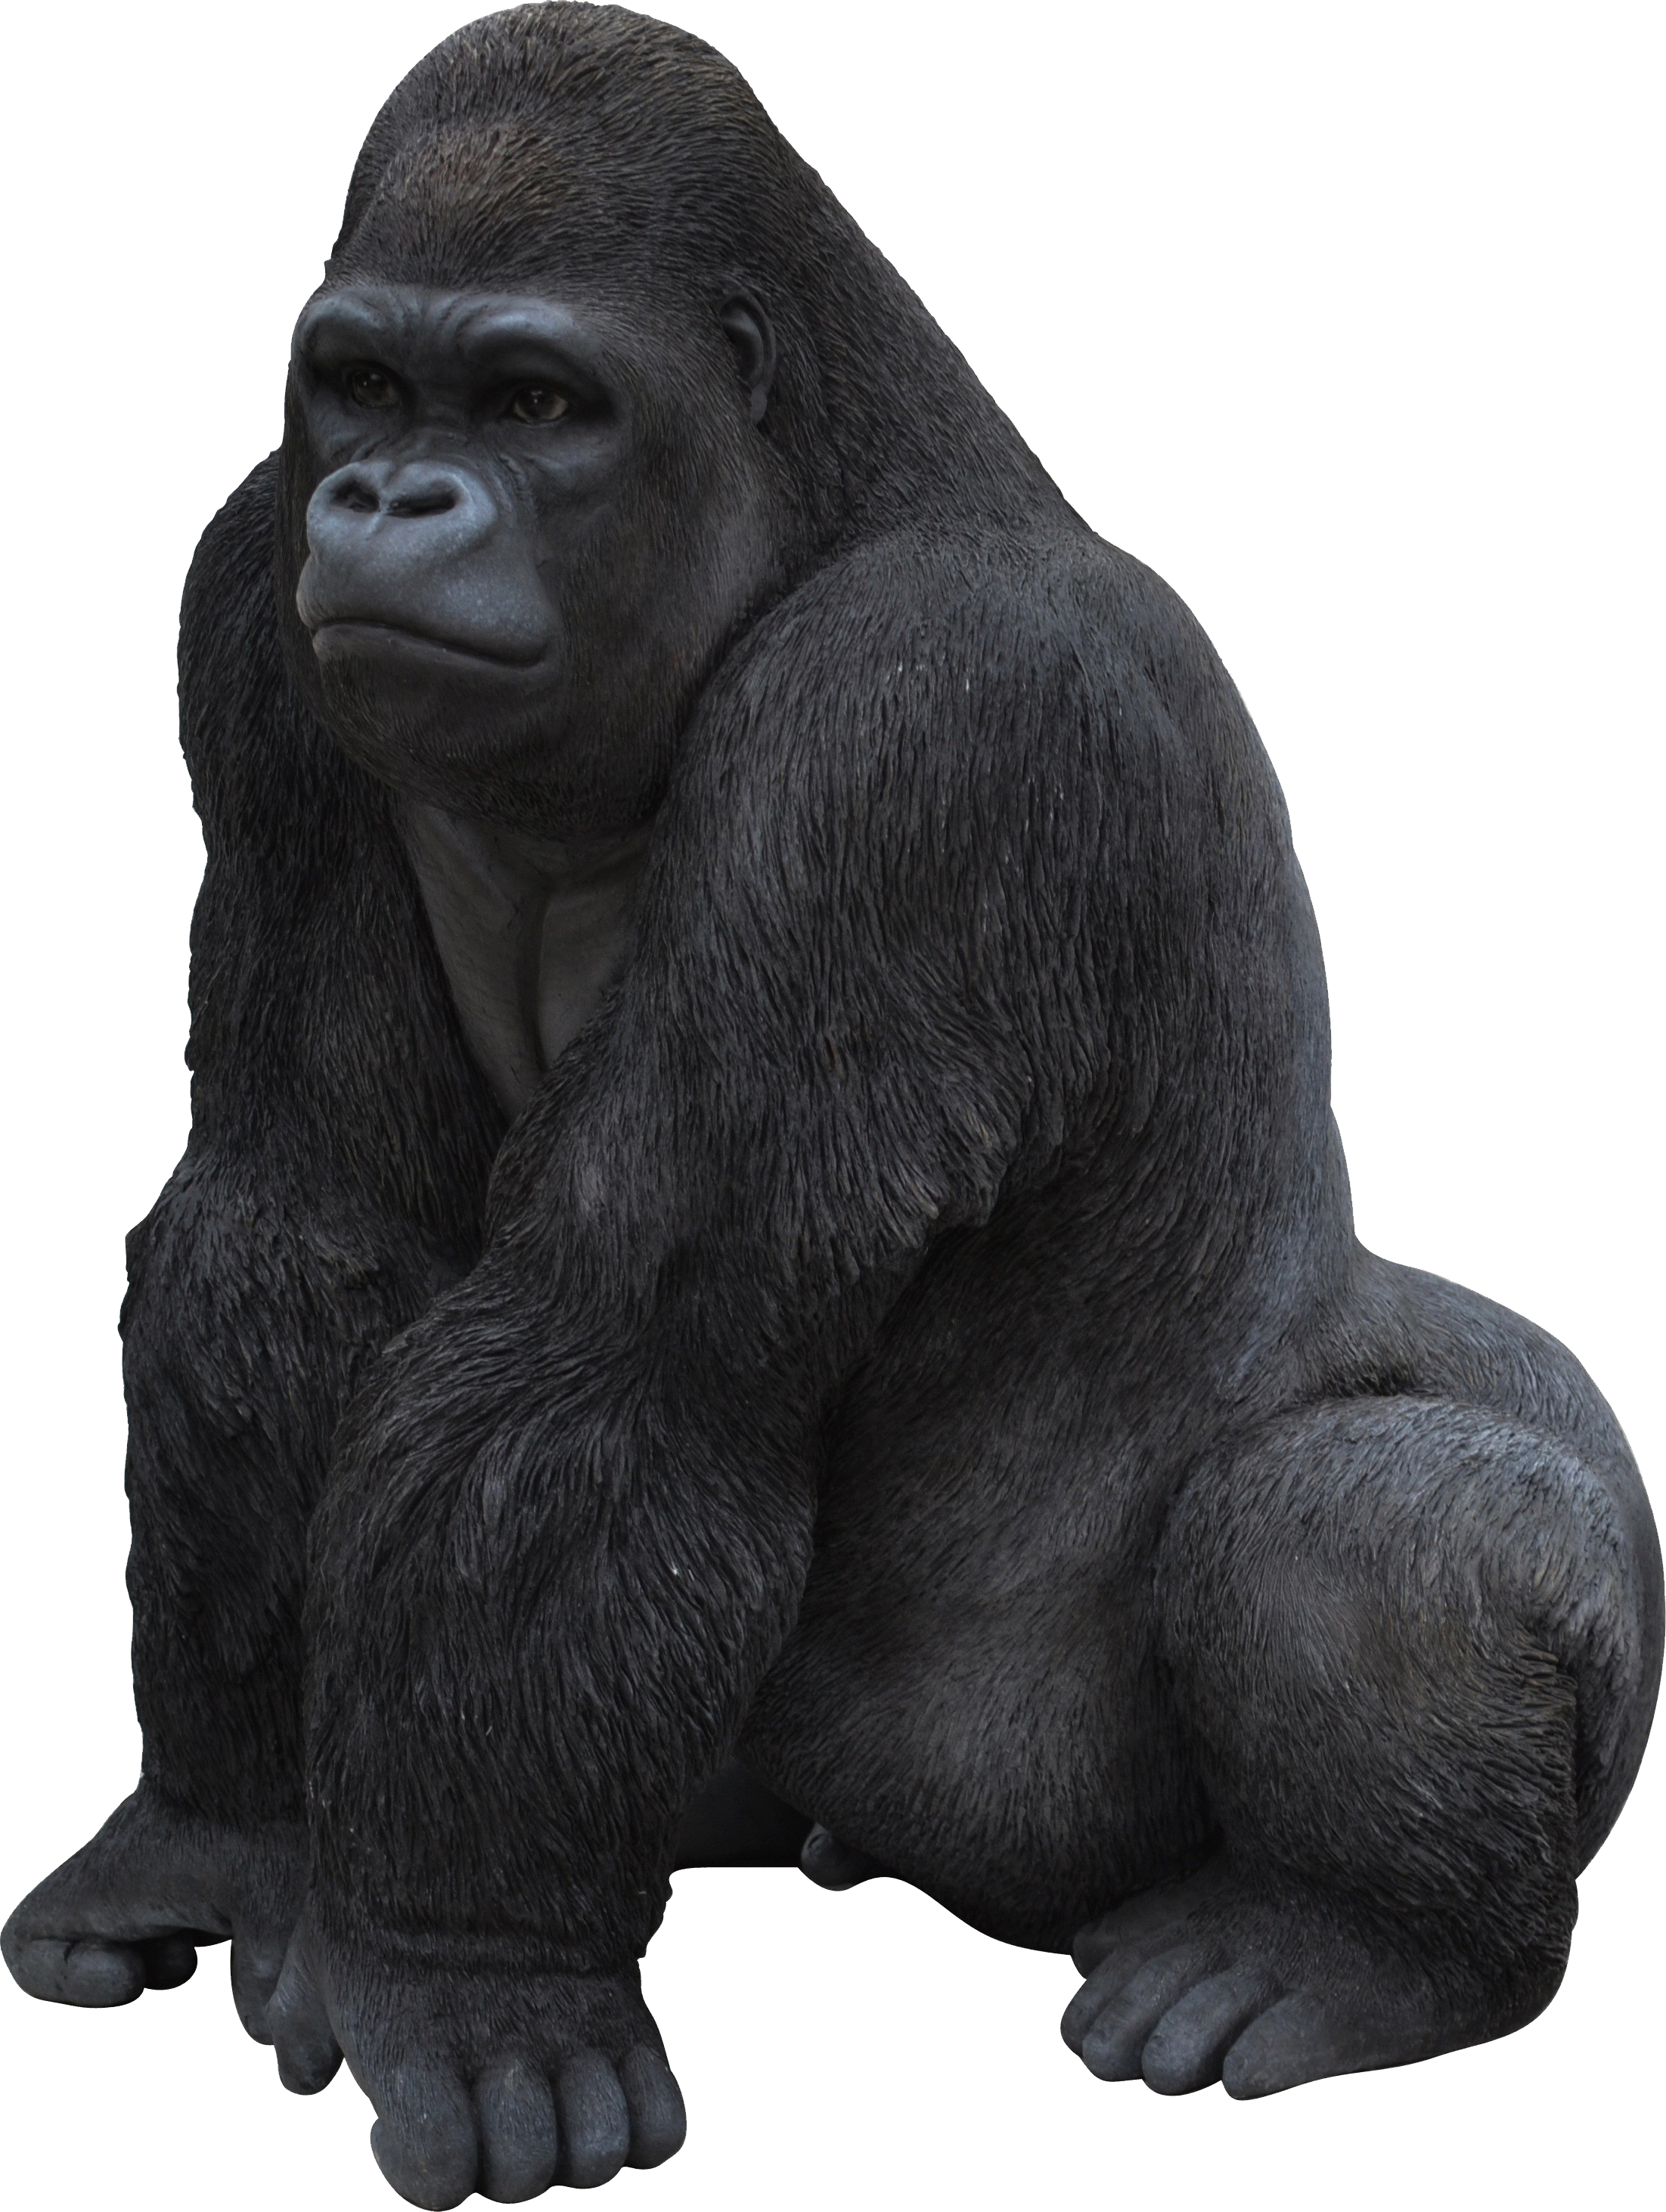 Gorilla Png Clipart PNG Image